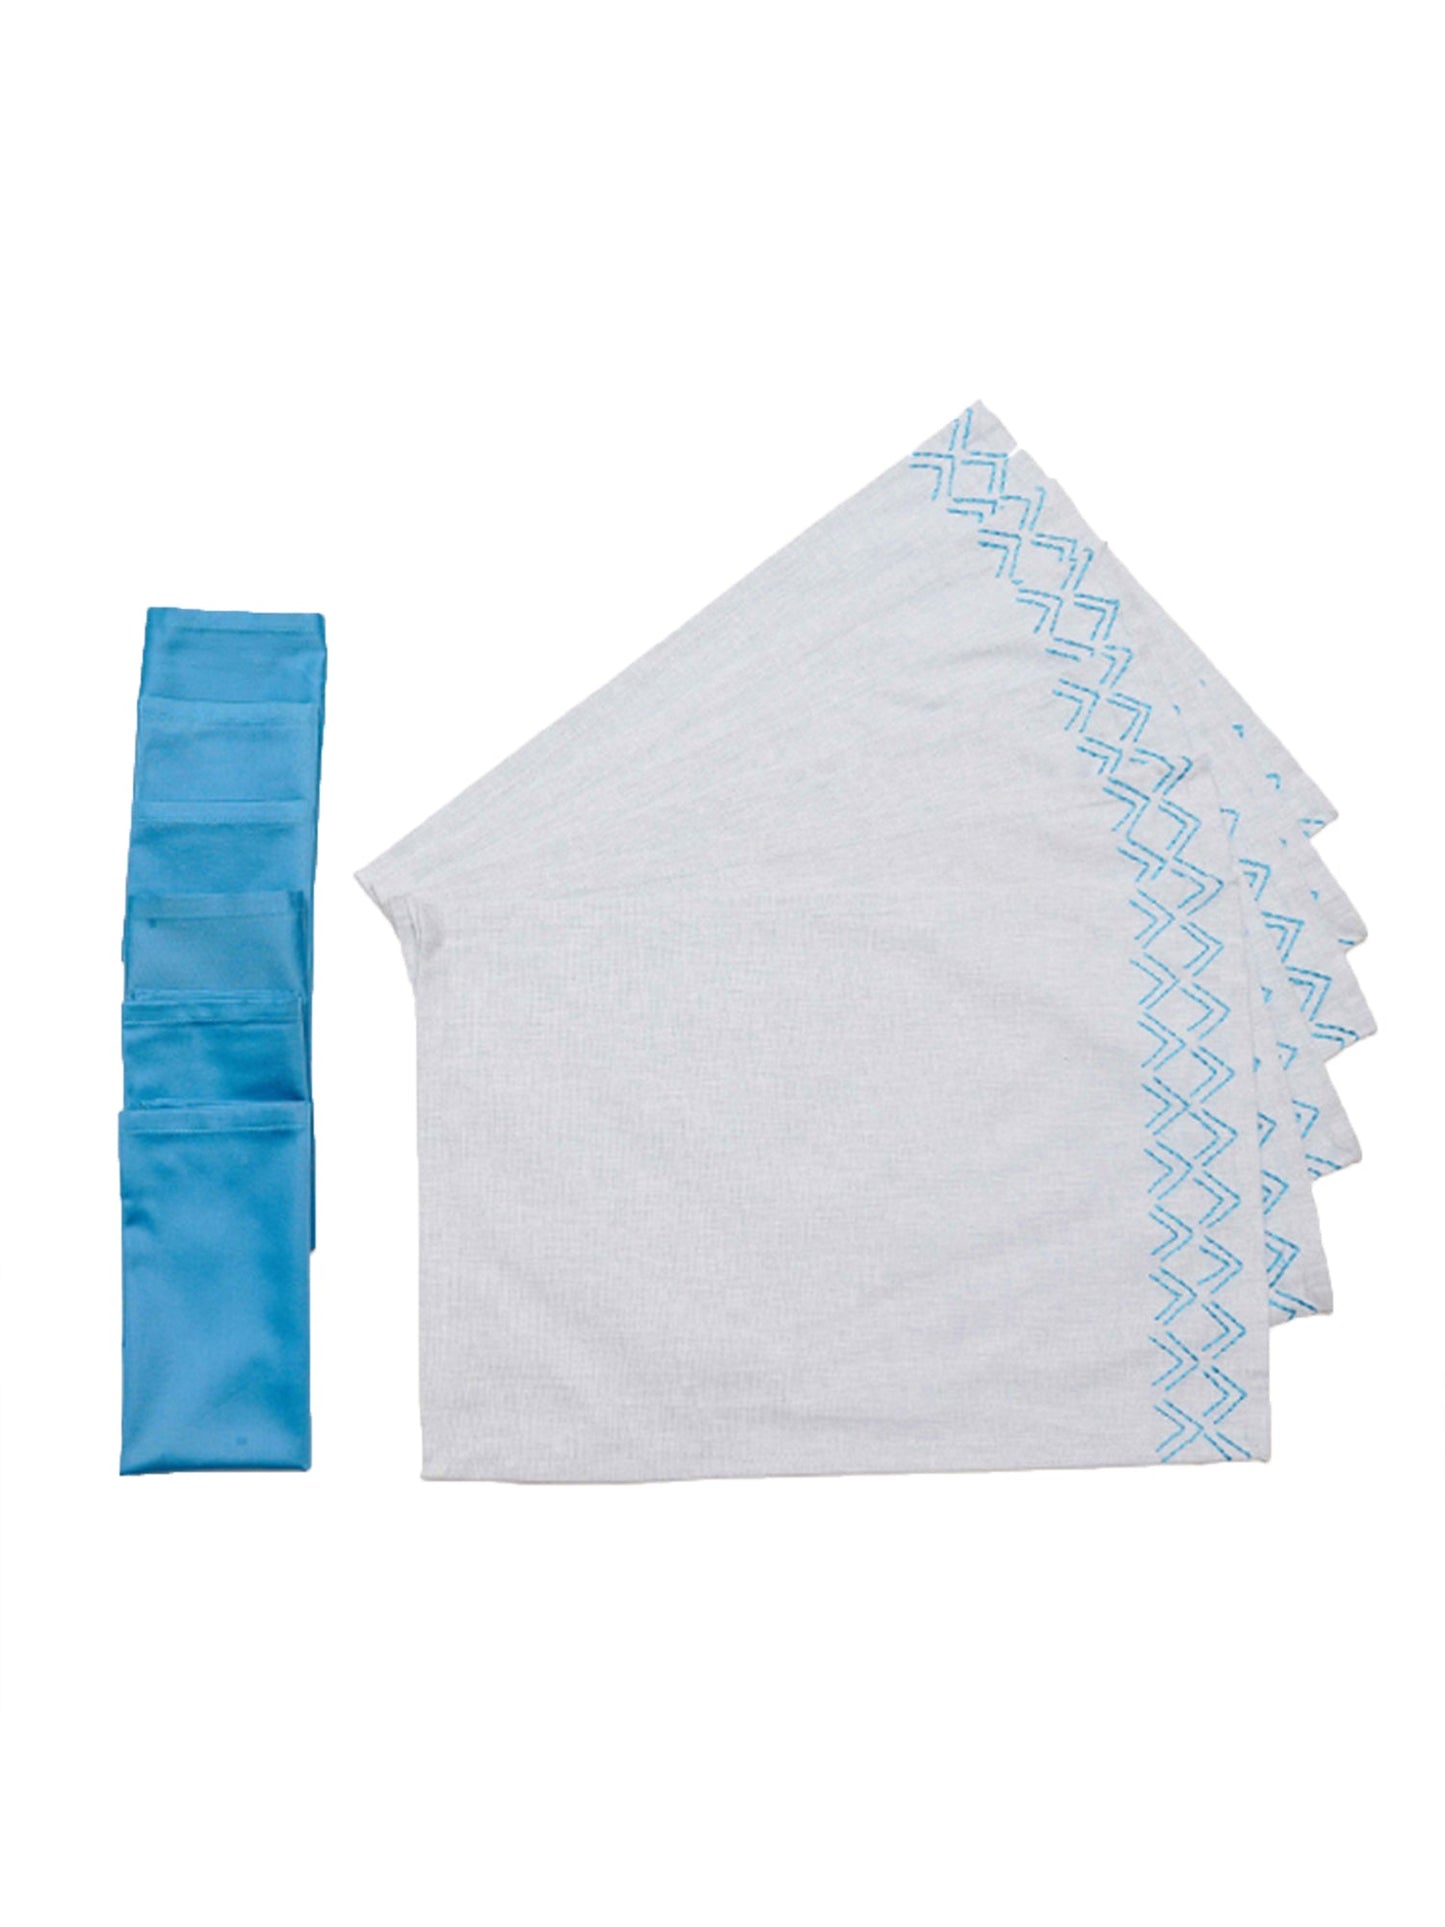 Table Mats and Napkins 100% Cotton Embroidered Light Blue and Aqua - 13" x 19" ; 16" x 16" - Set of 6